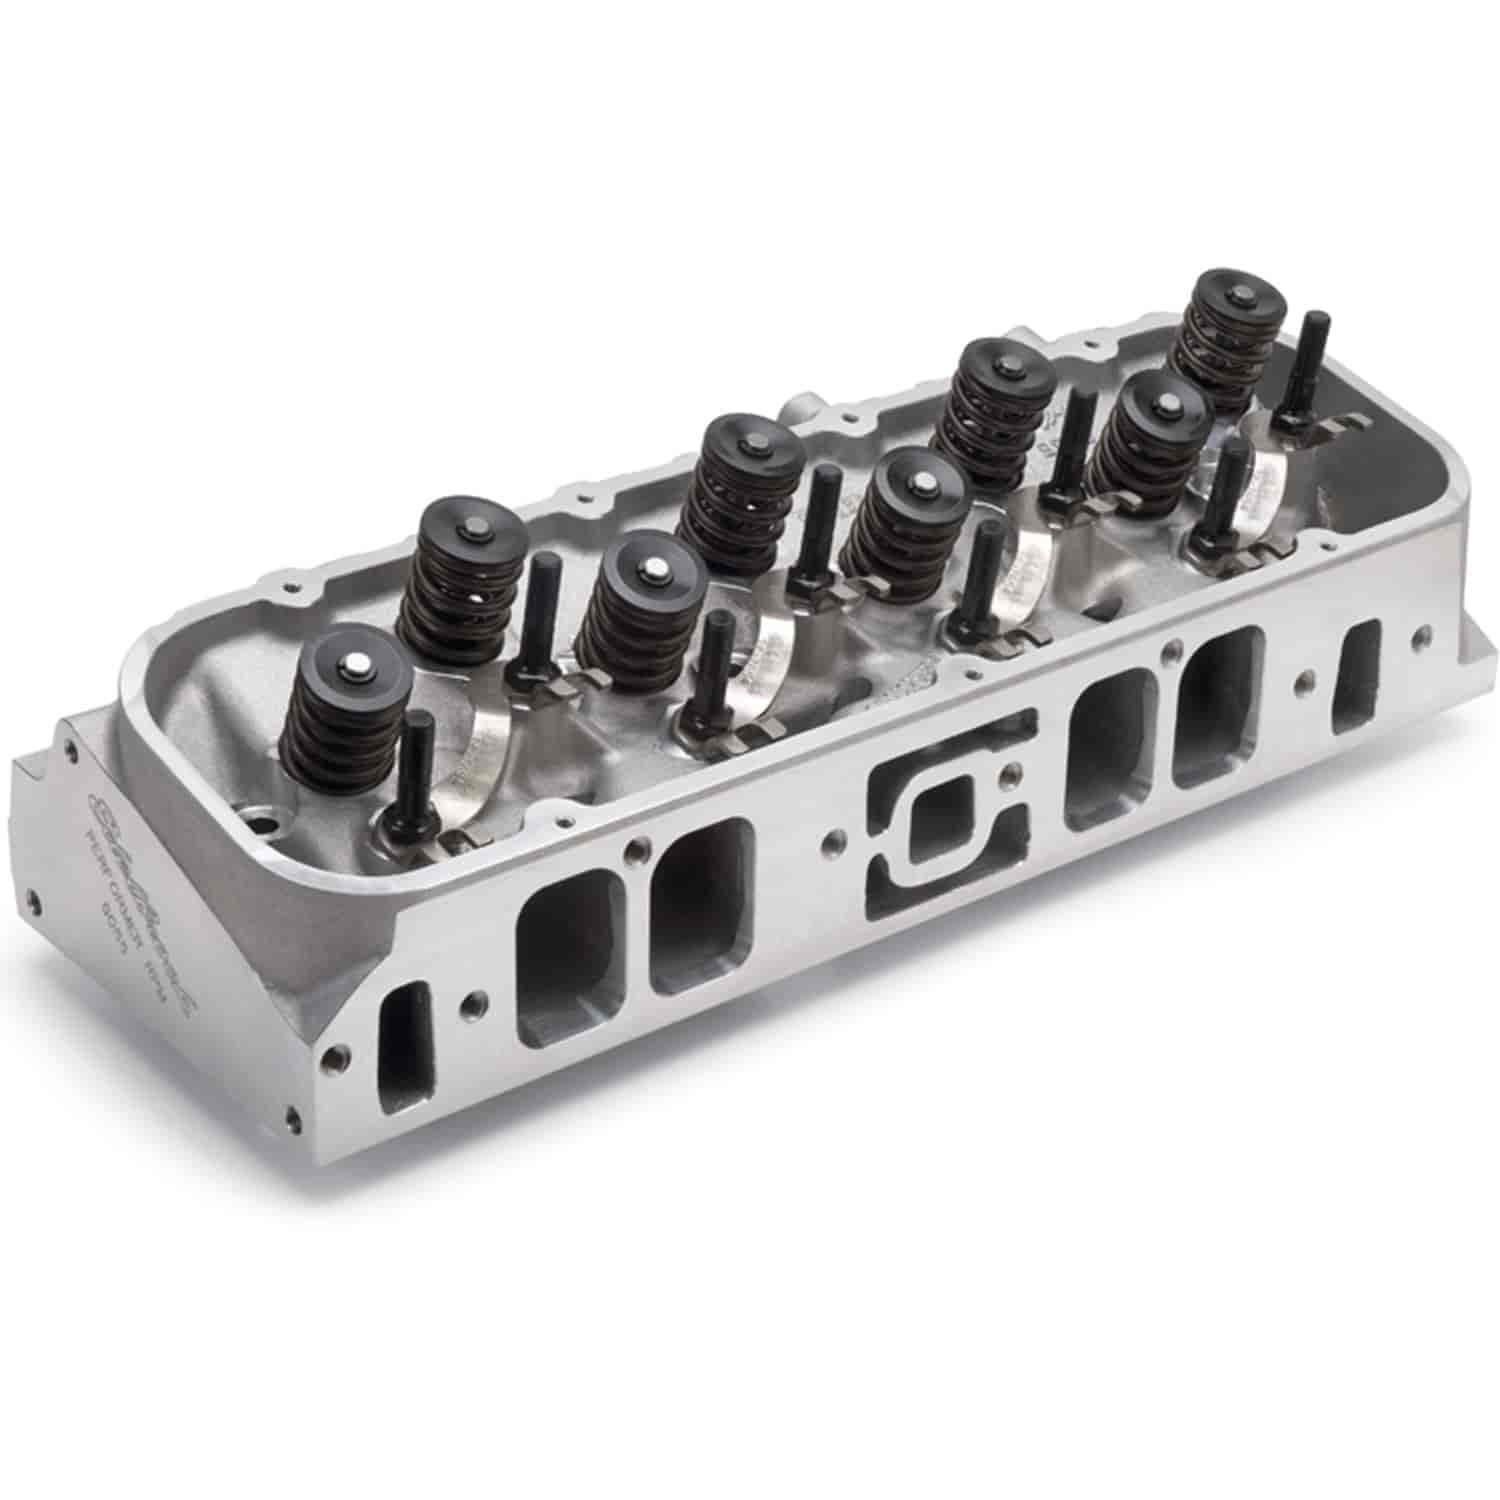 RPM Big-Block Chevy Rectangle Port Cylinder Head Hydraulic Flat Tappet Cam